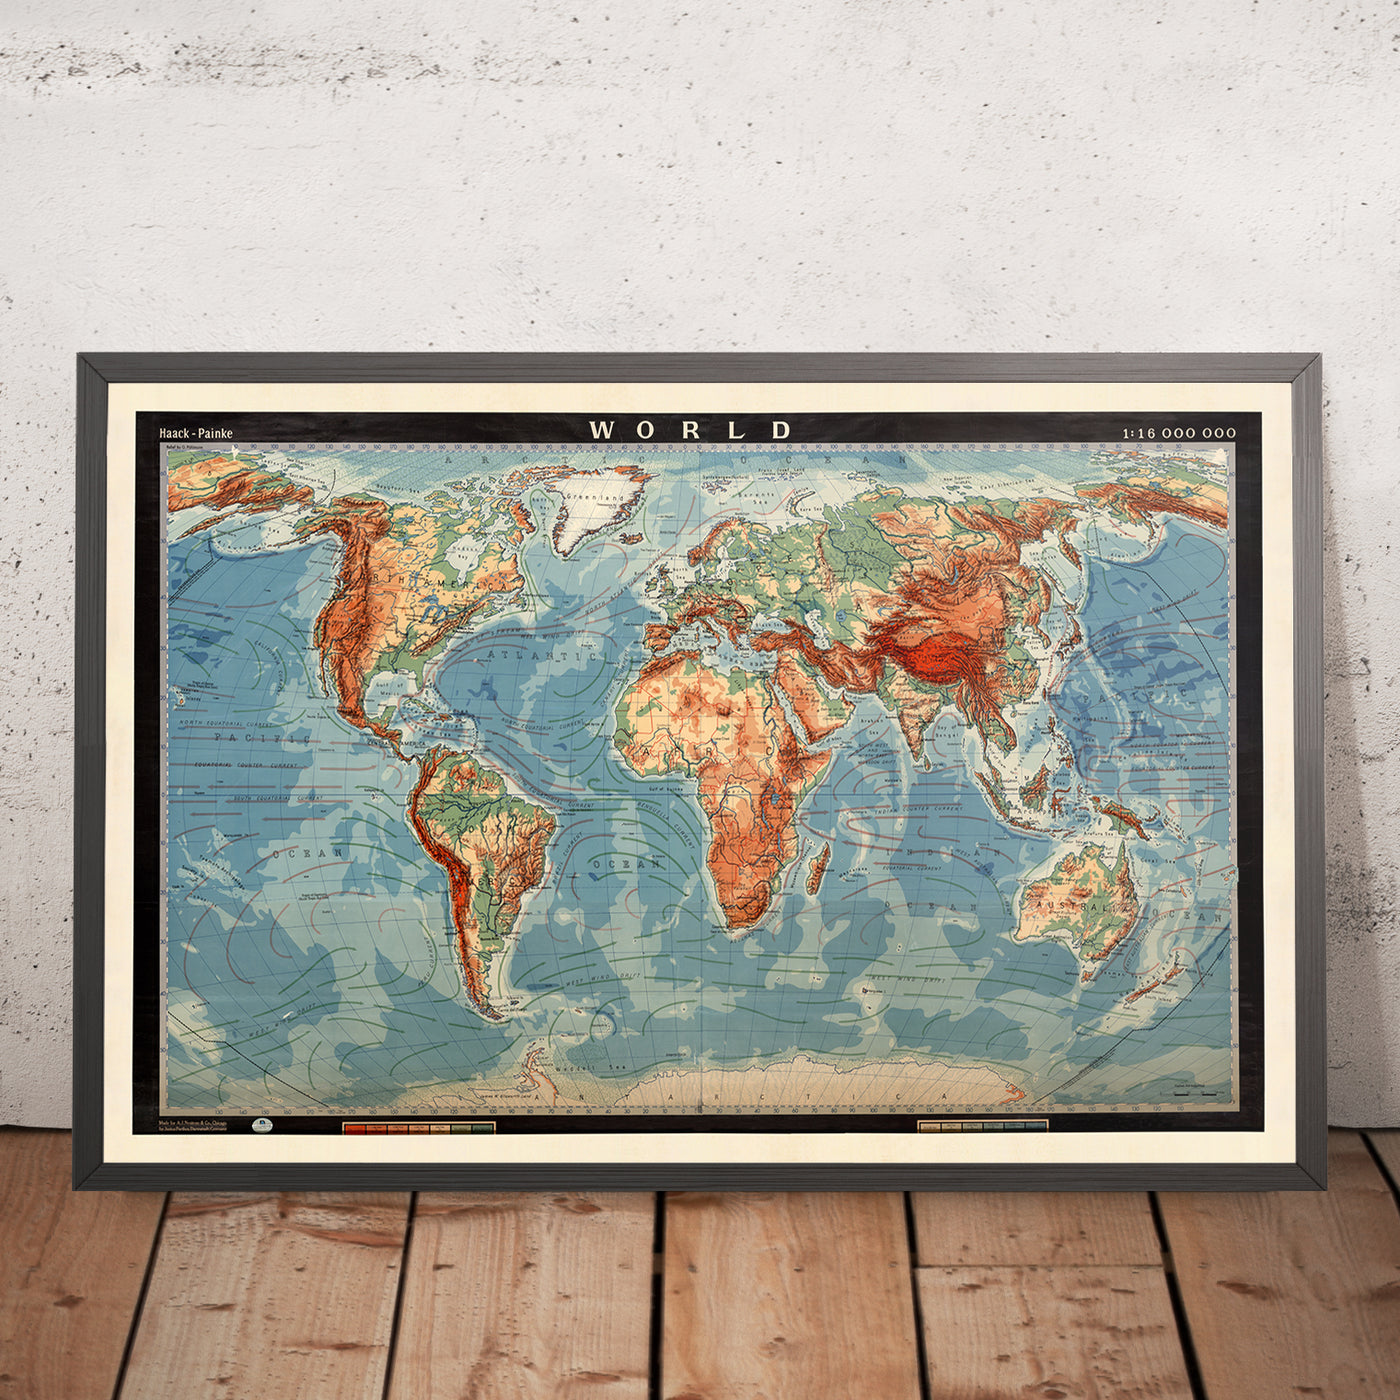 Old Physical World Map by G Pohlmann, 1950: Educational Lecture Hall Chart